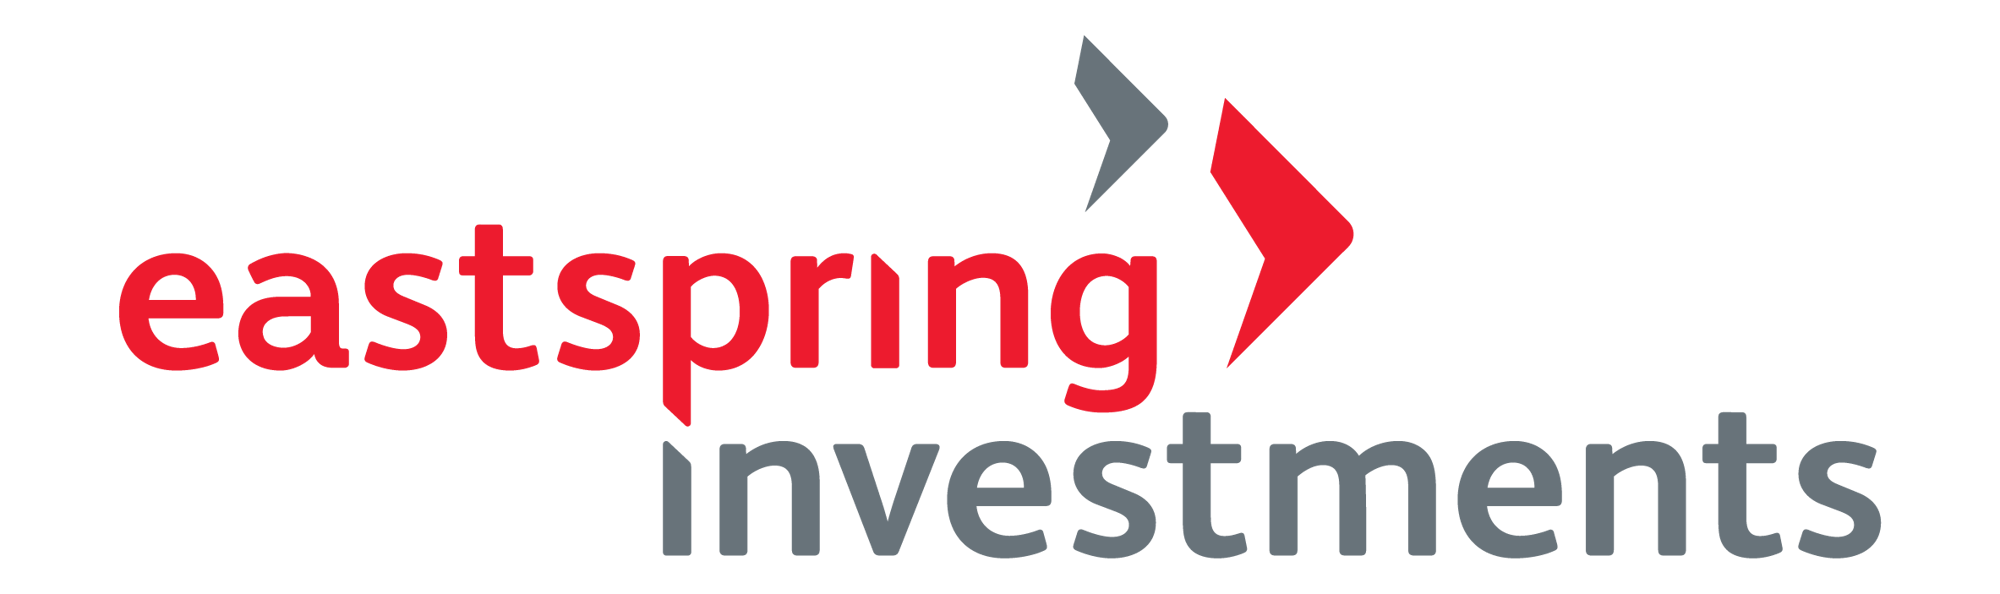 Eastspring_Investments